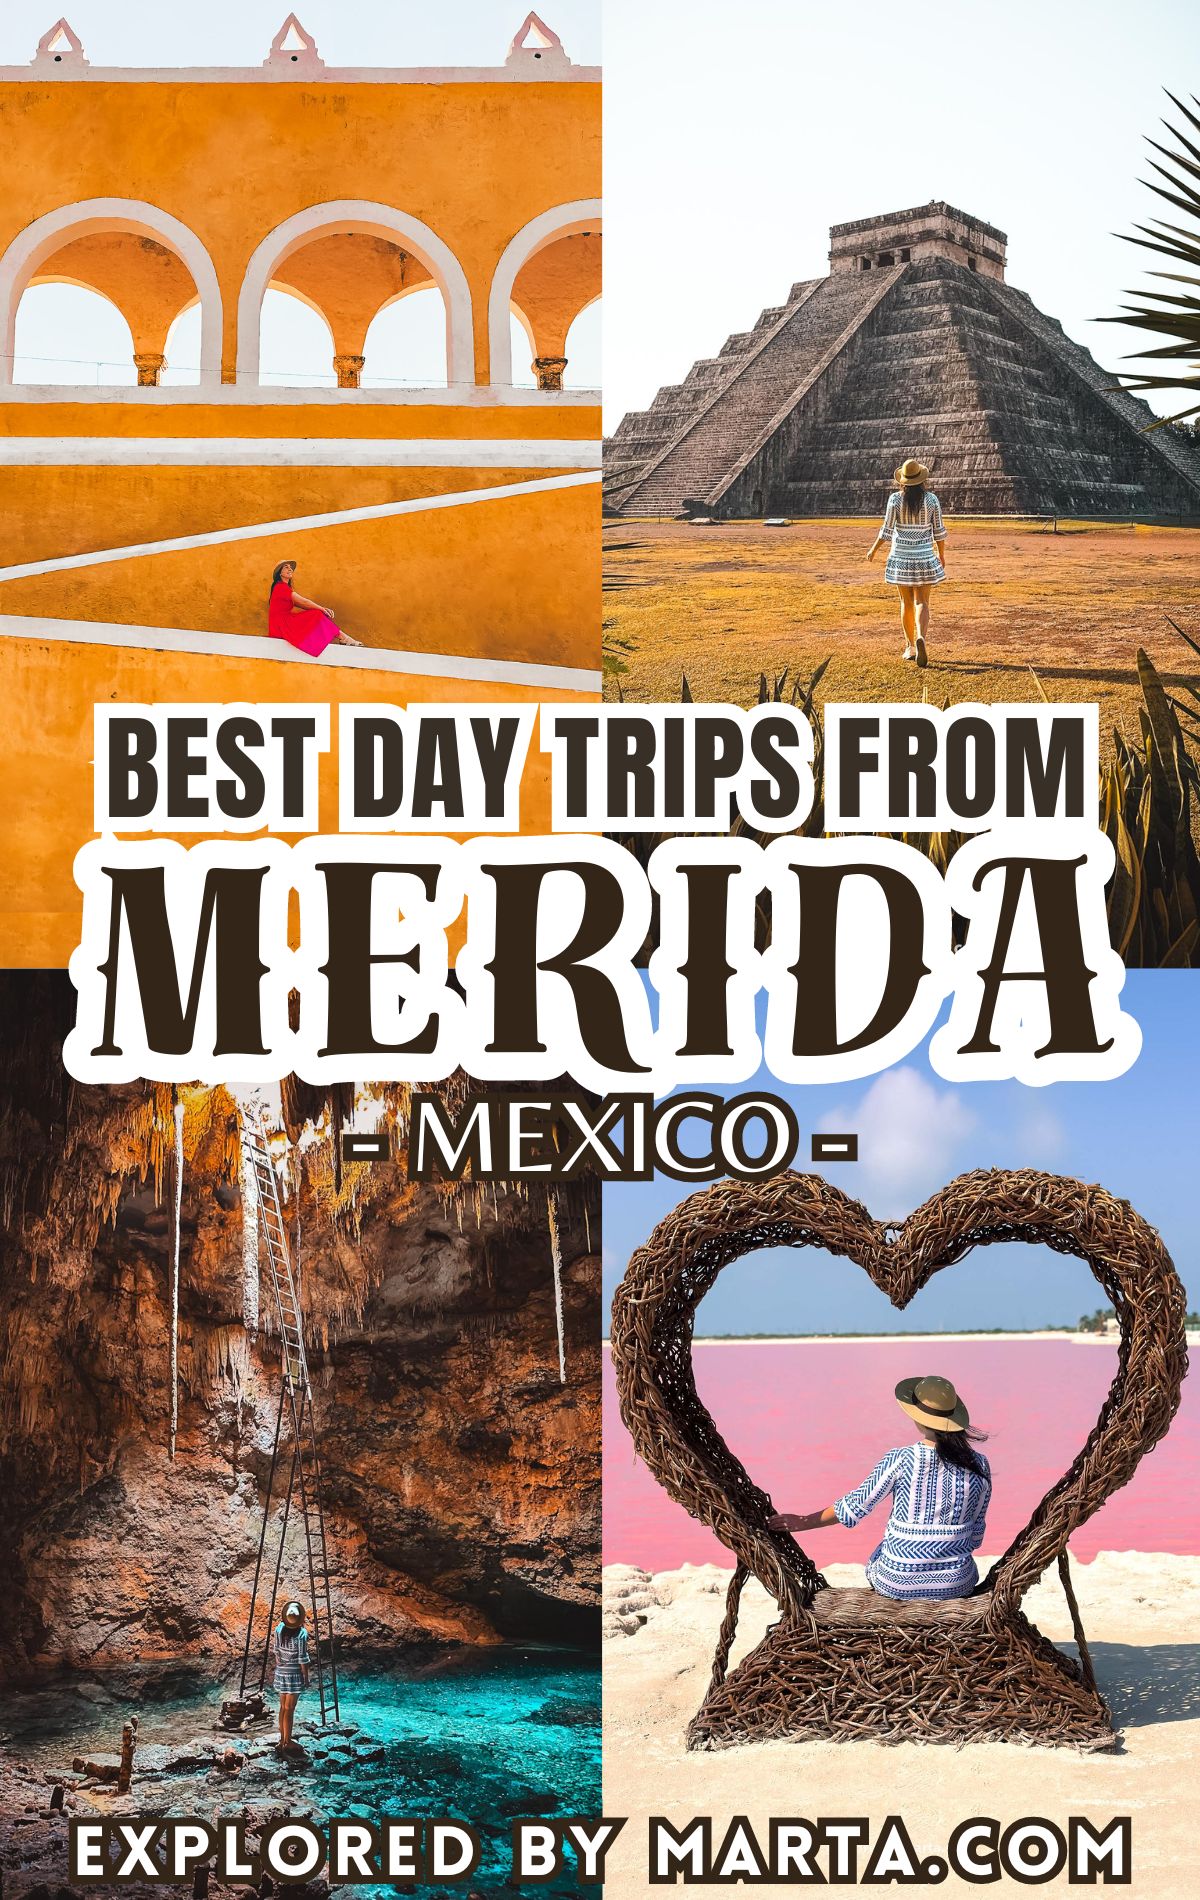 Most popular day trips from Merida, Mexico